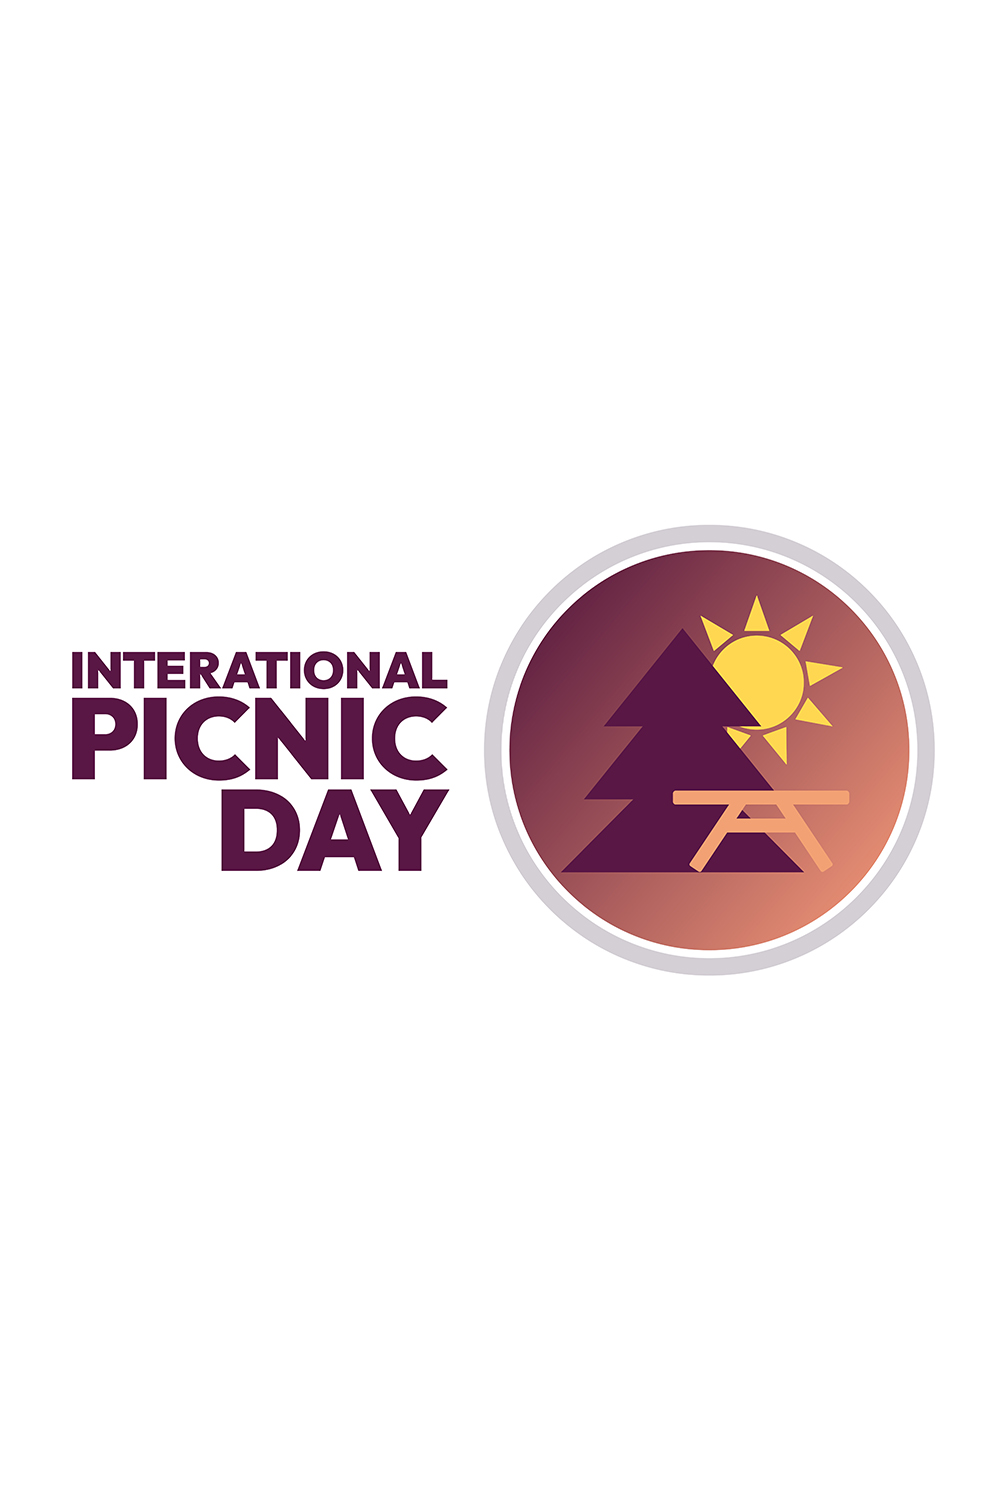 International picnic day pinterest preview image.